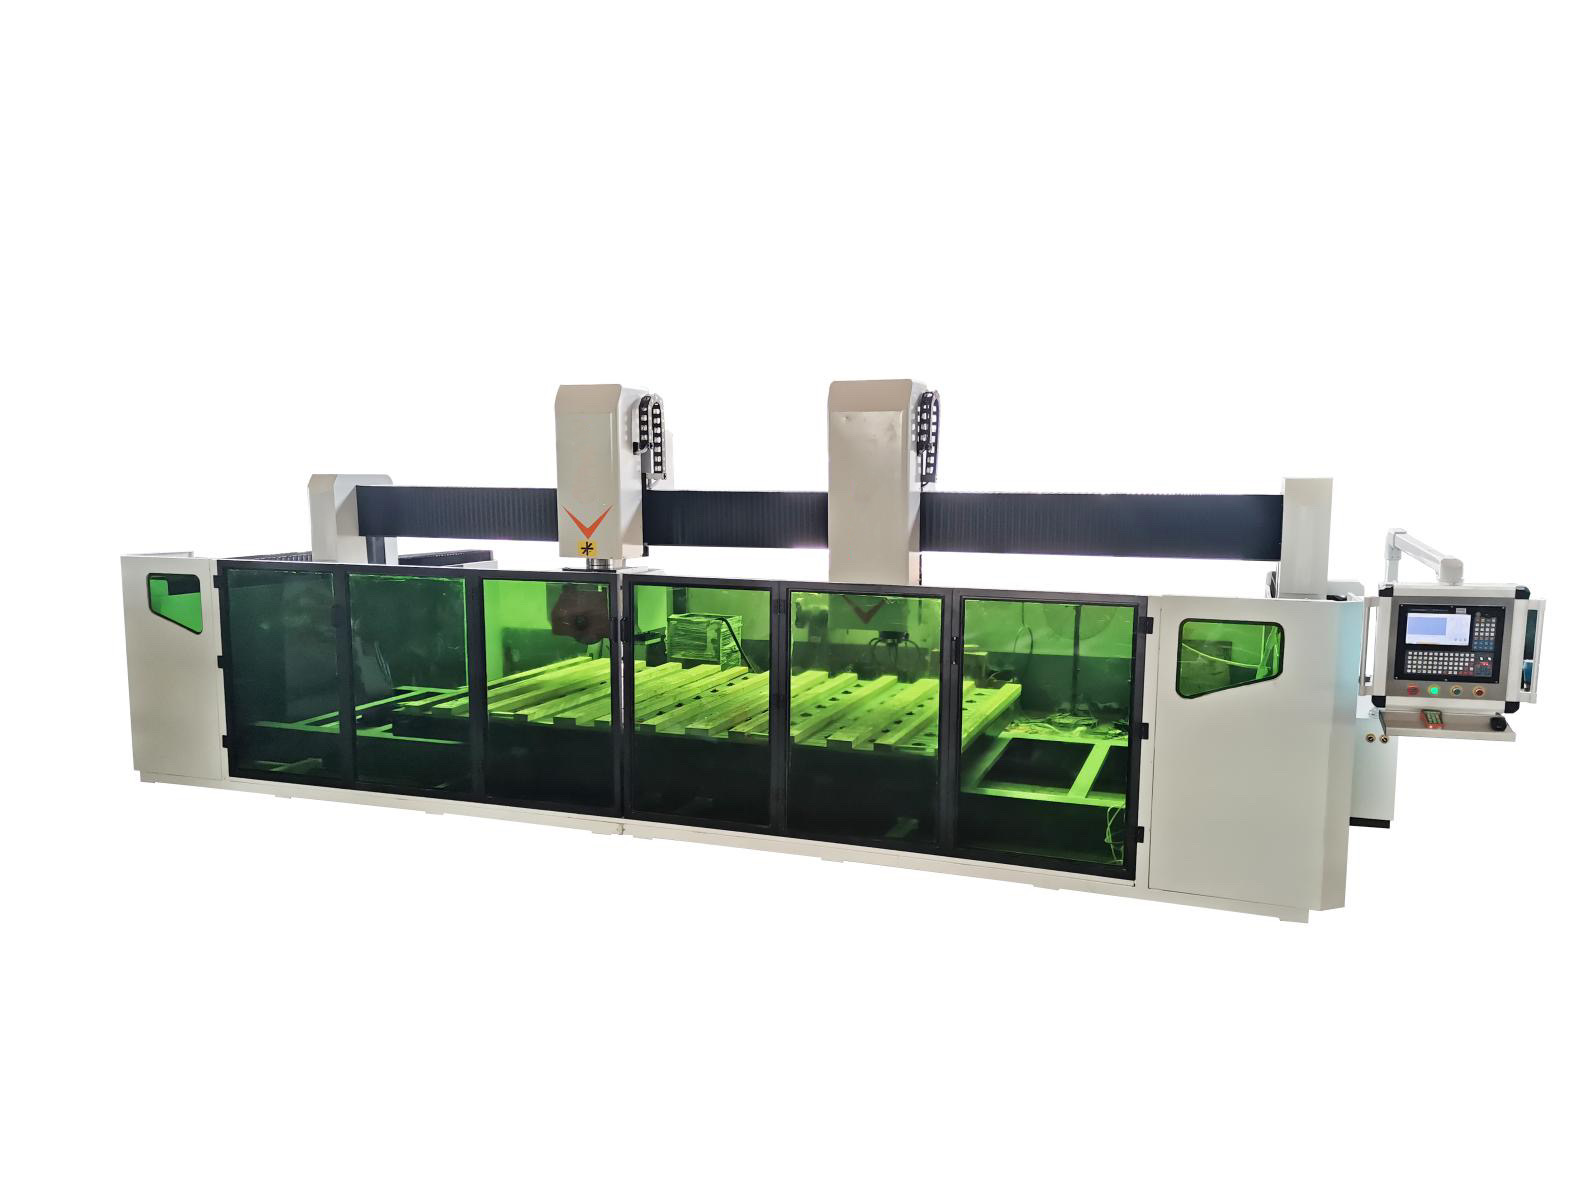 Multifunction High Precision Stable Marble Granite Stone Atc1530 cnc router machine for aluminum